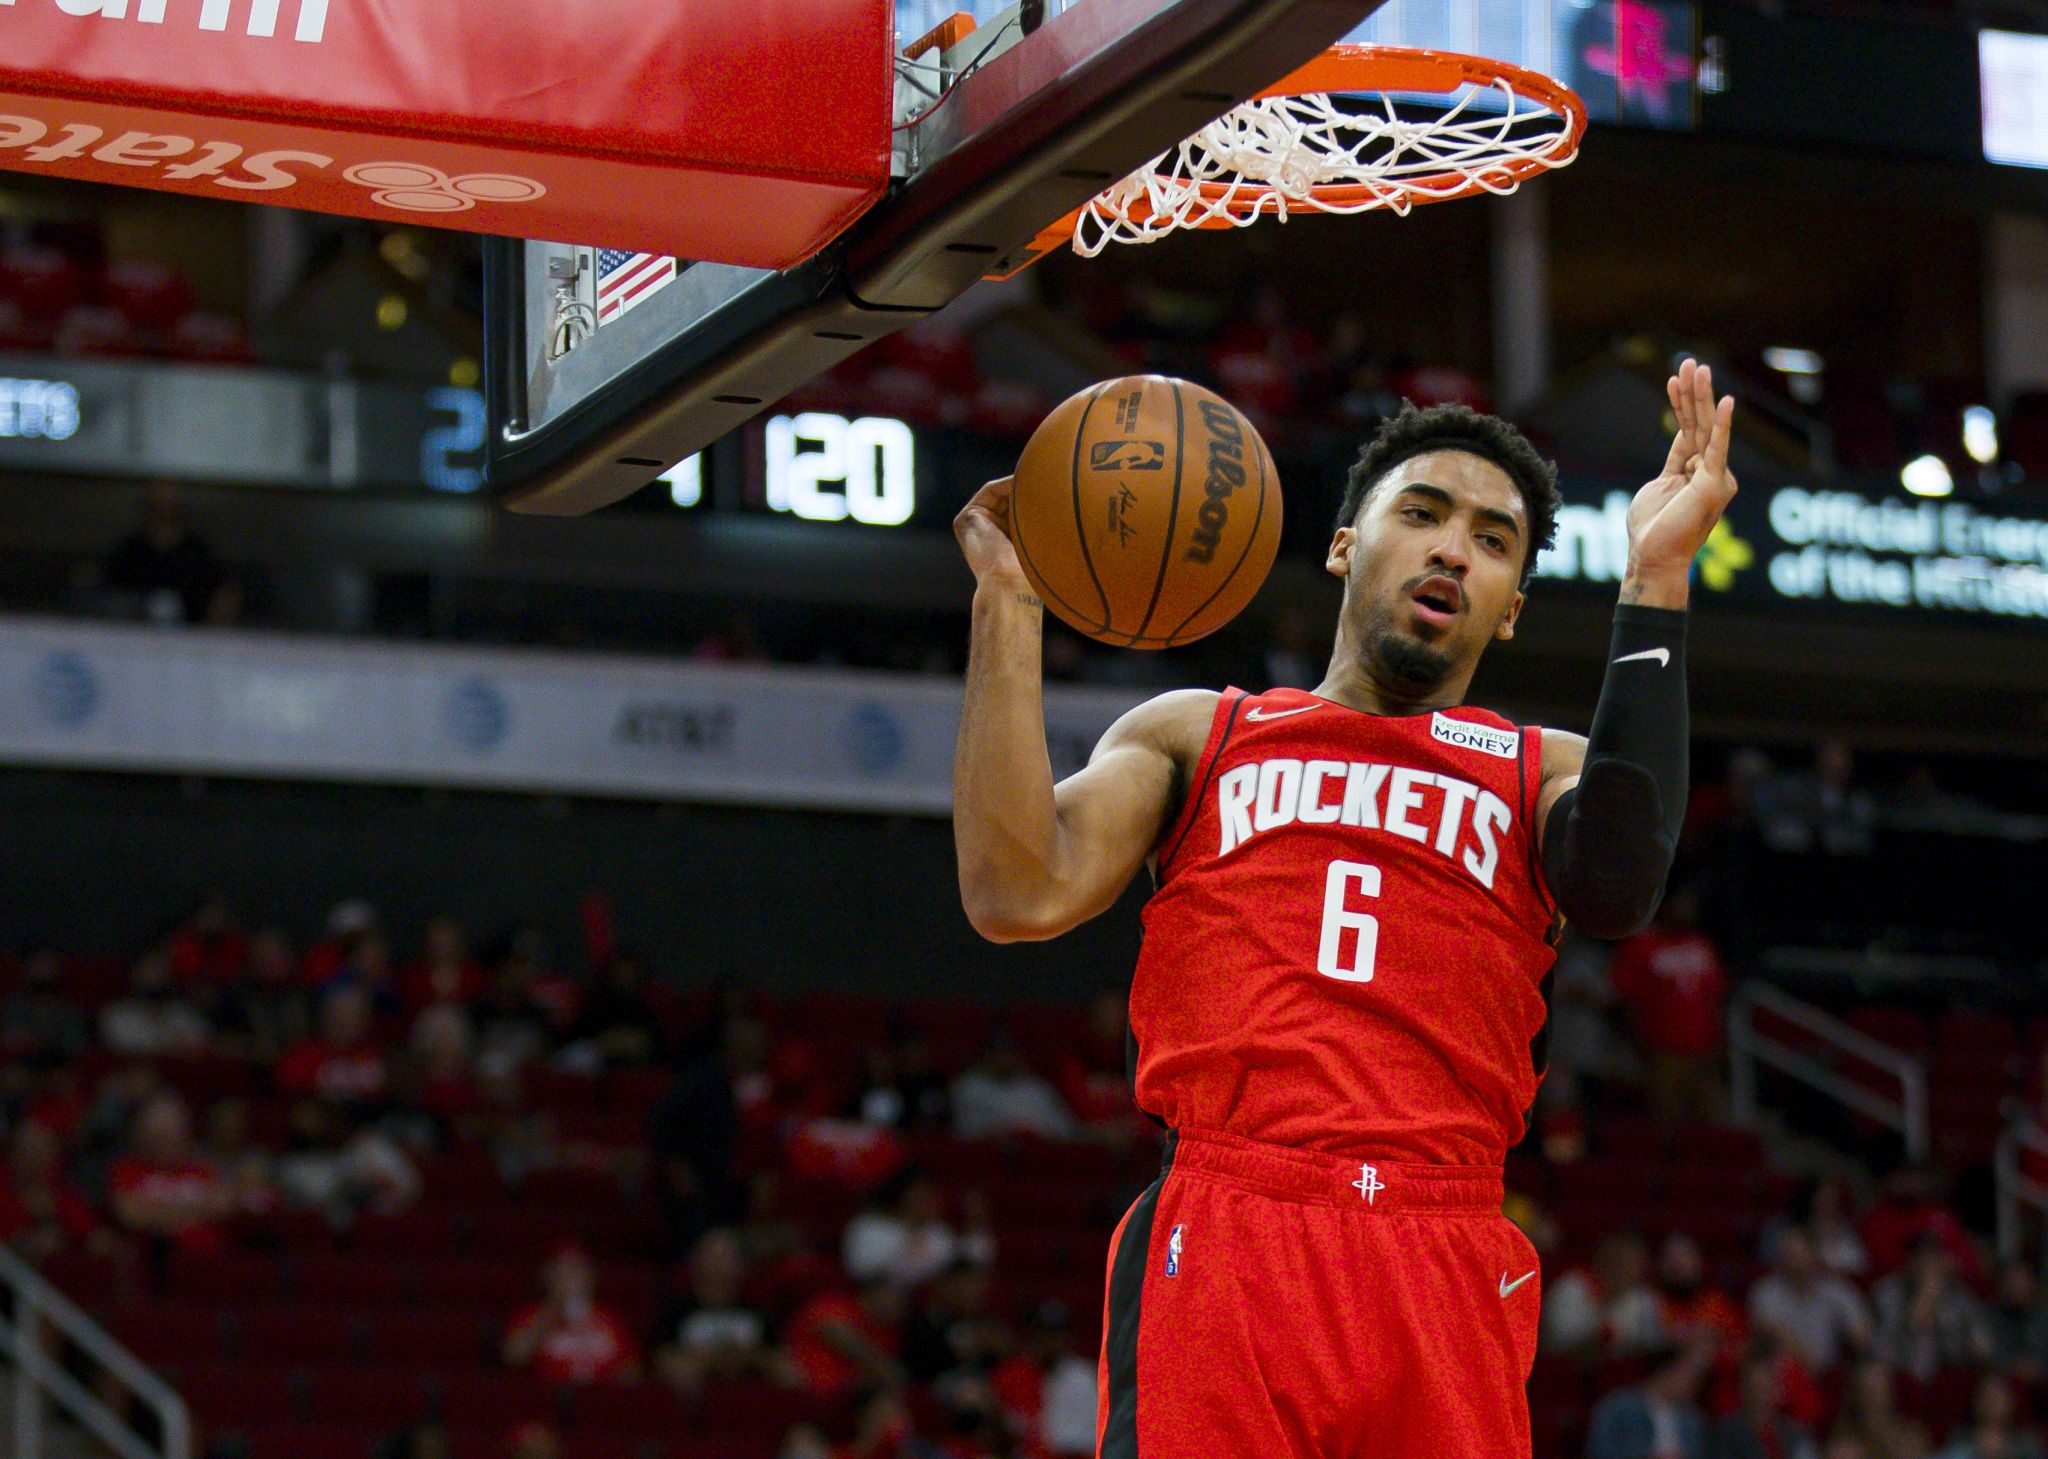 Garrison Mathews happy to be back in Rockets' lineup after protocols